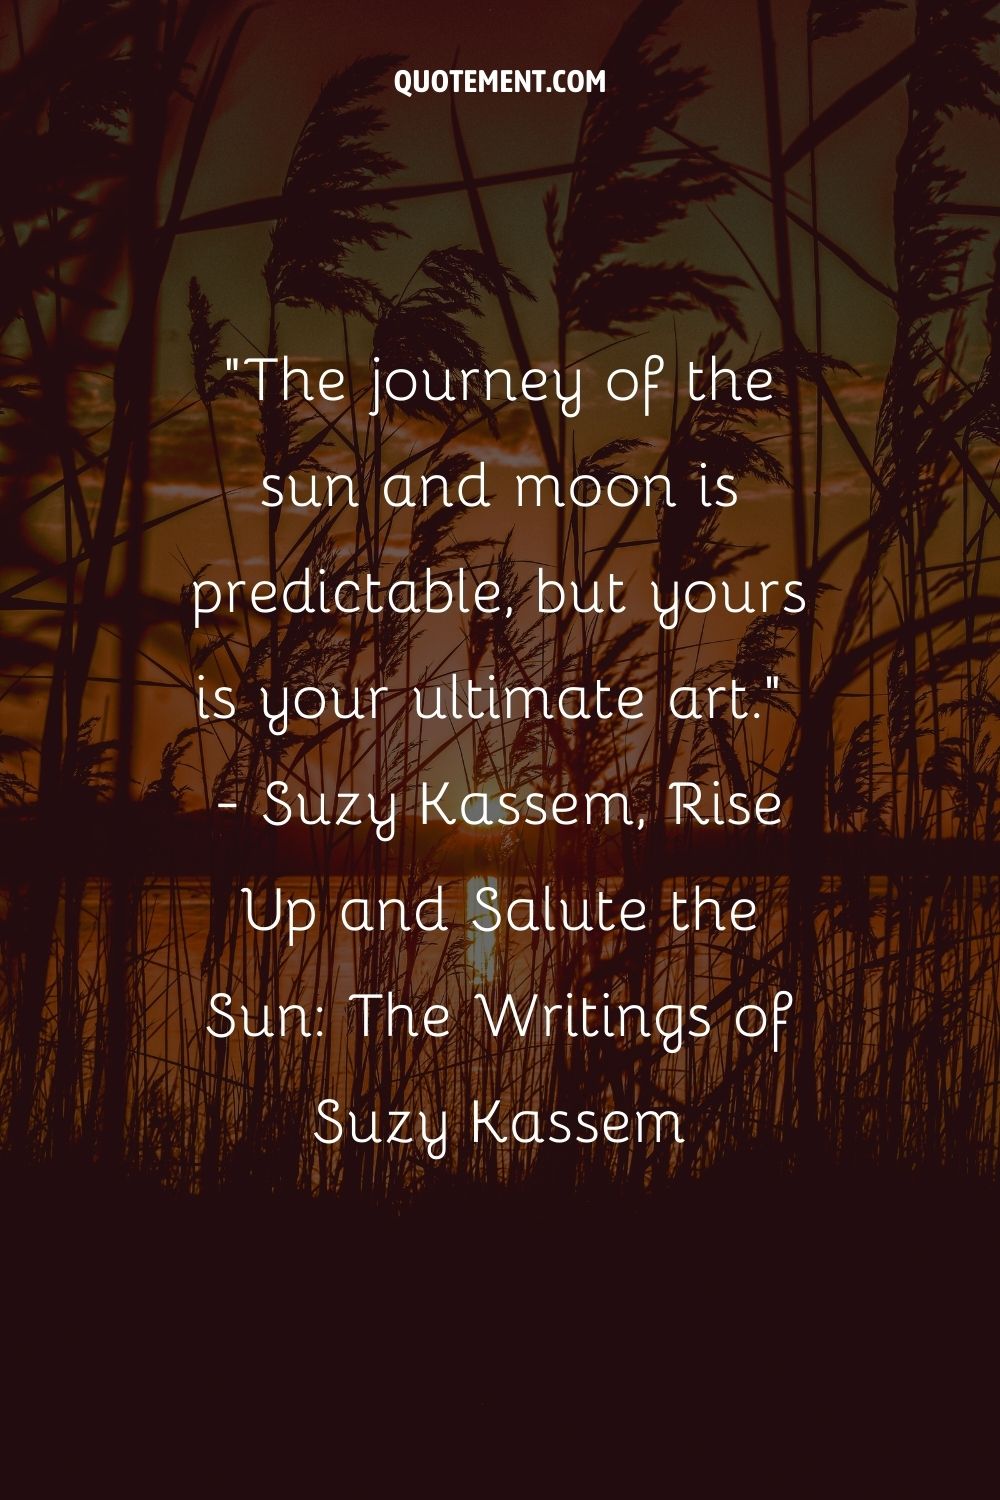 The journey of the sun and moon is predictable, but yours is your ultimate art.